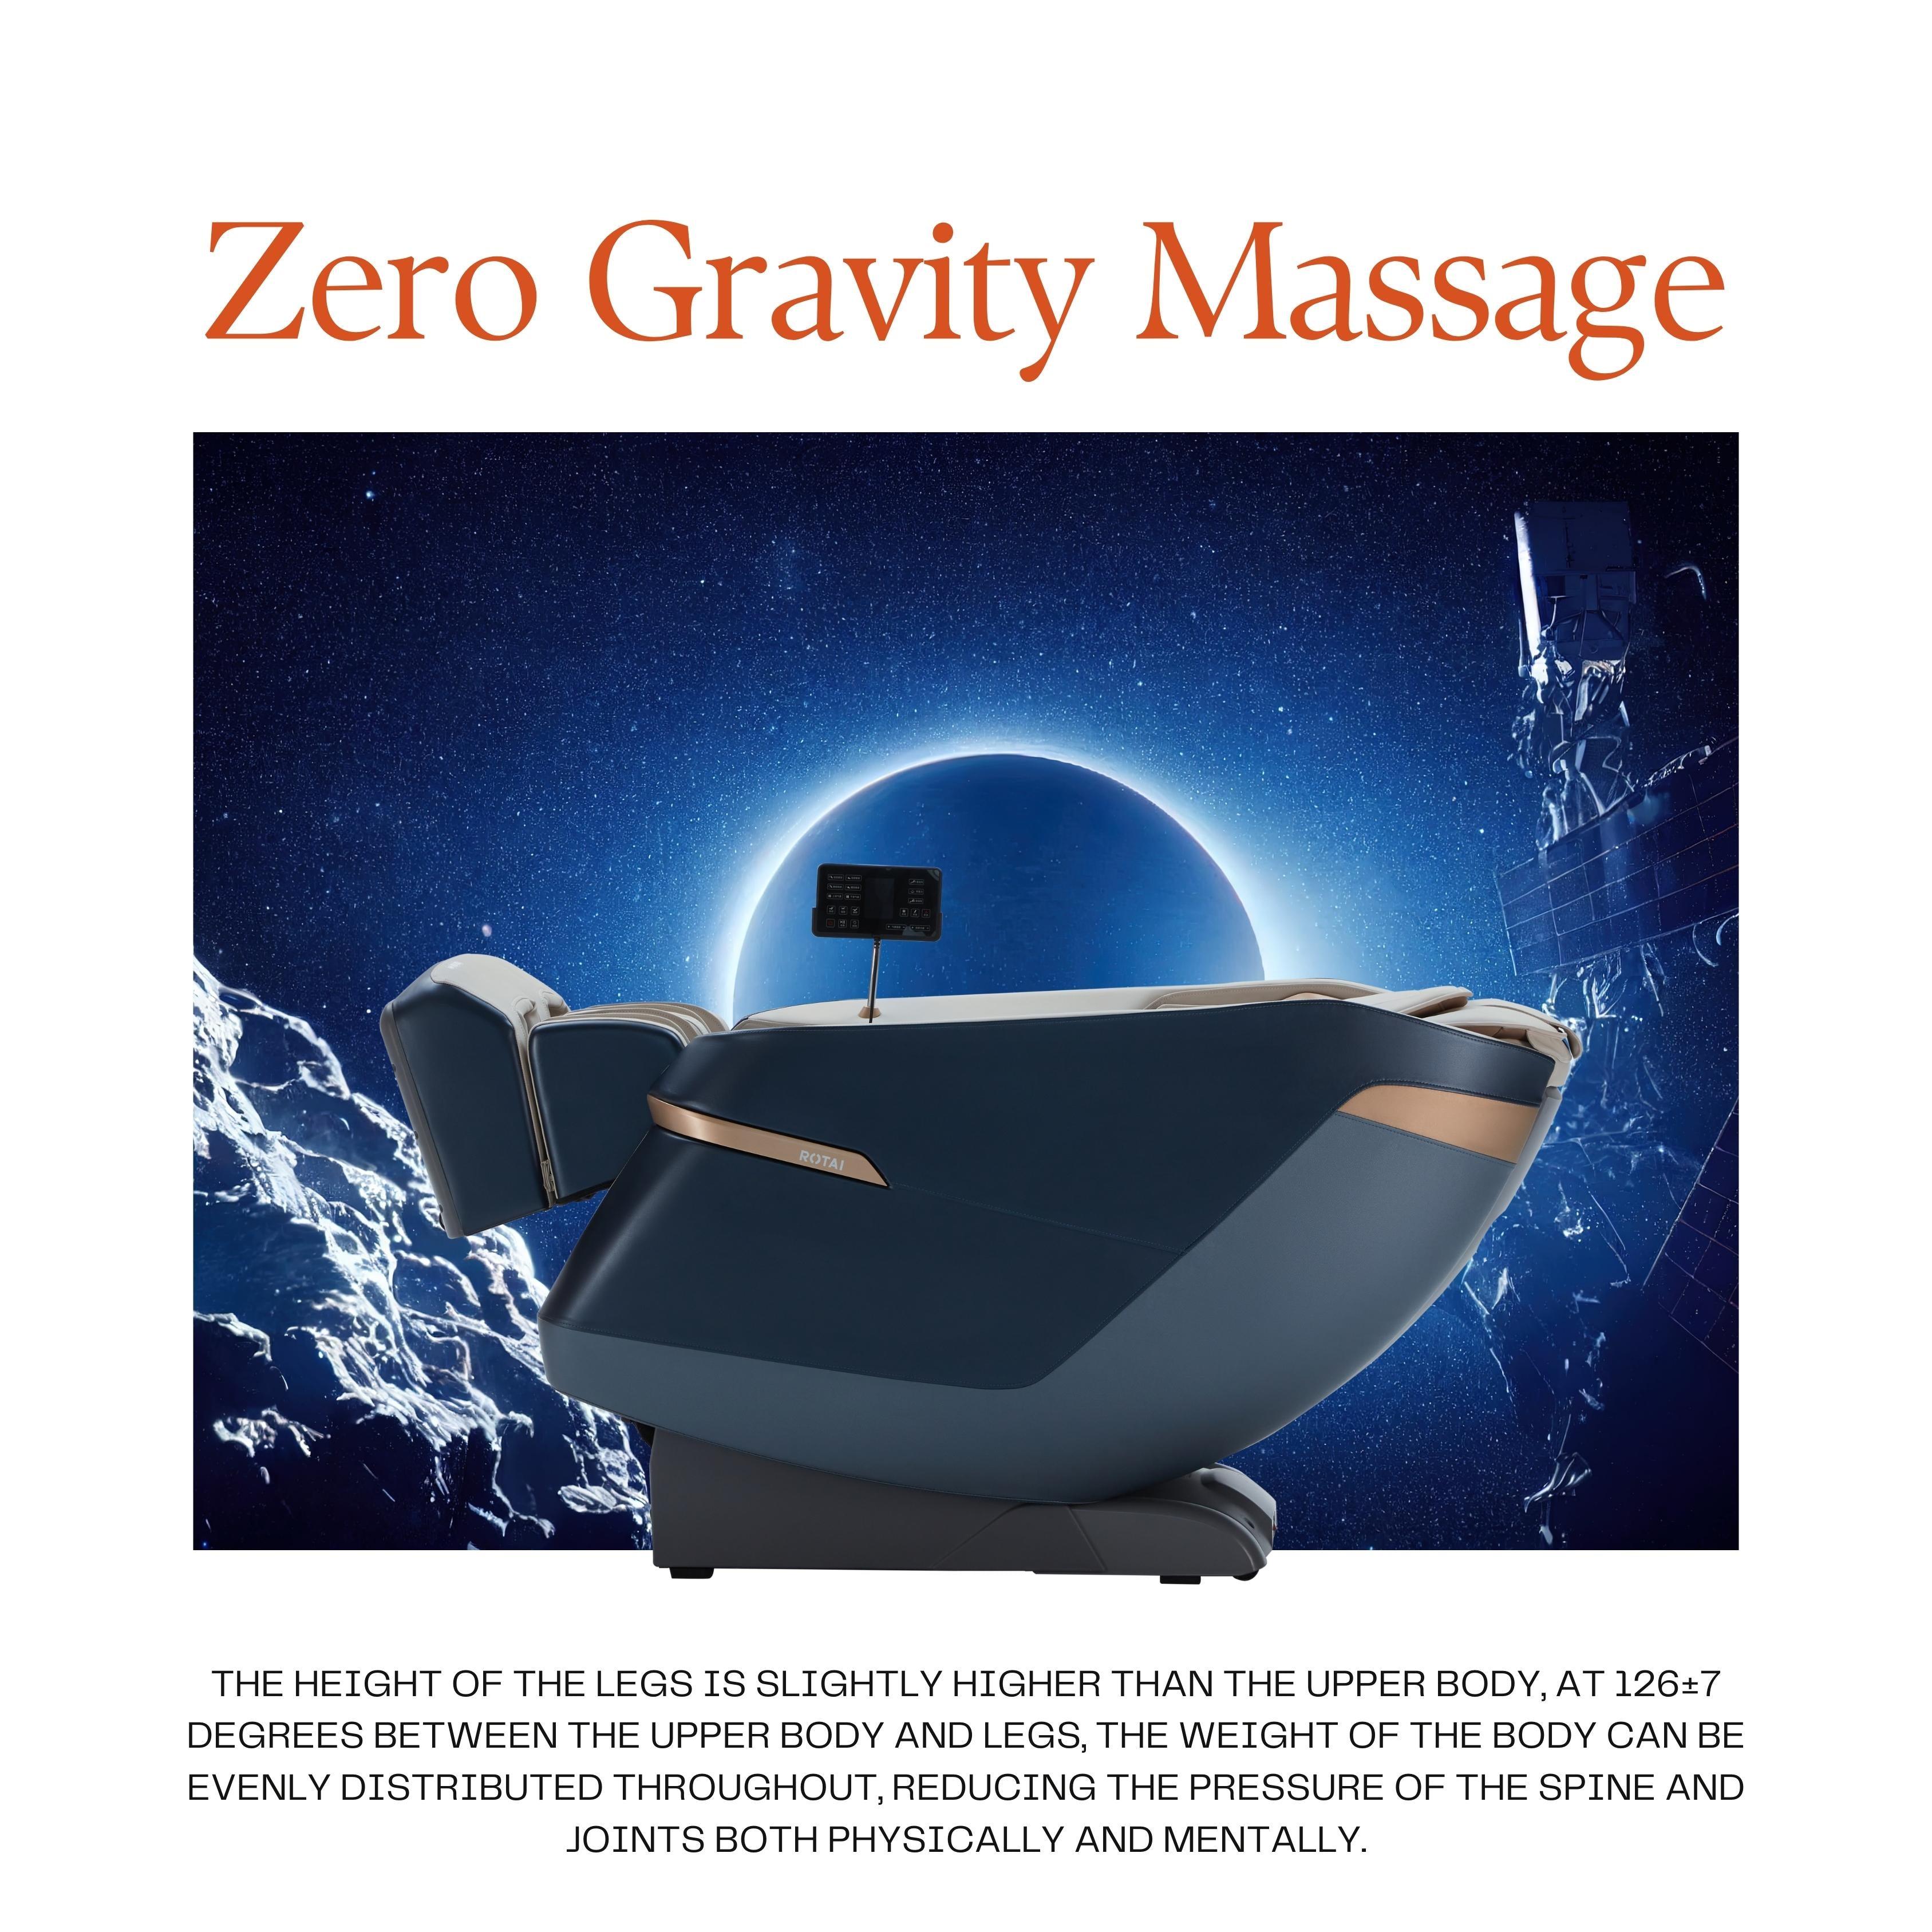 Blue Jimny Massage Chair with Zero Gravity Massage feature against a cosmic background. Best massage chair UAE, massage chair Dubai.